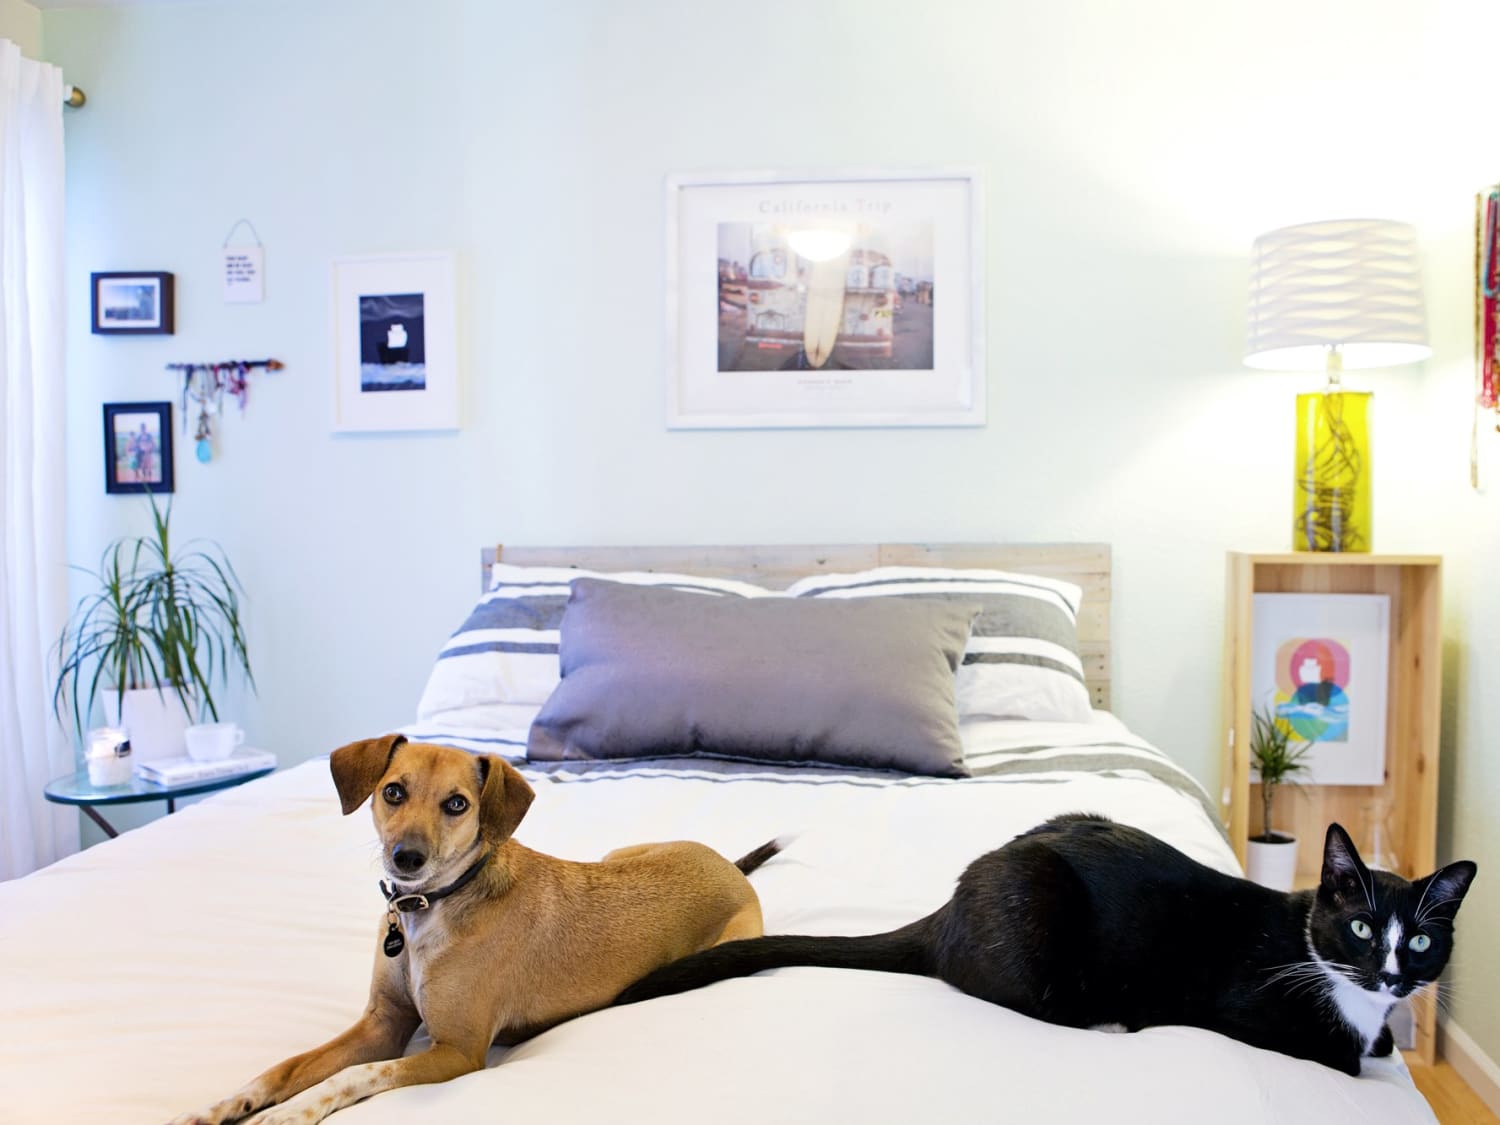 5 Tips to Create a Stylish Home with Pets